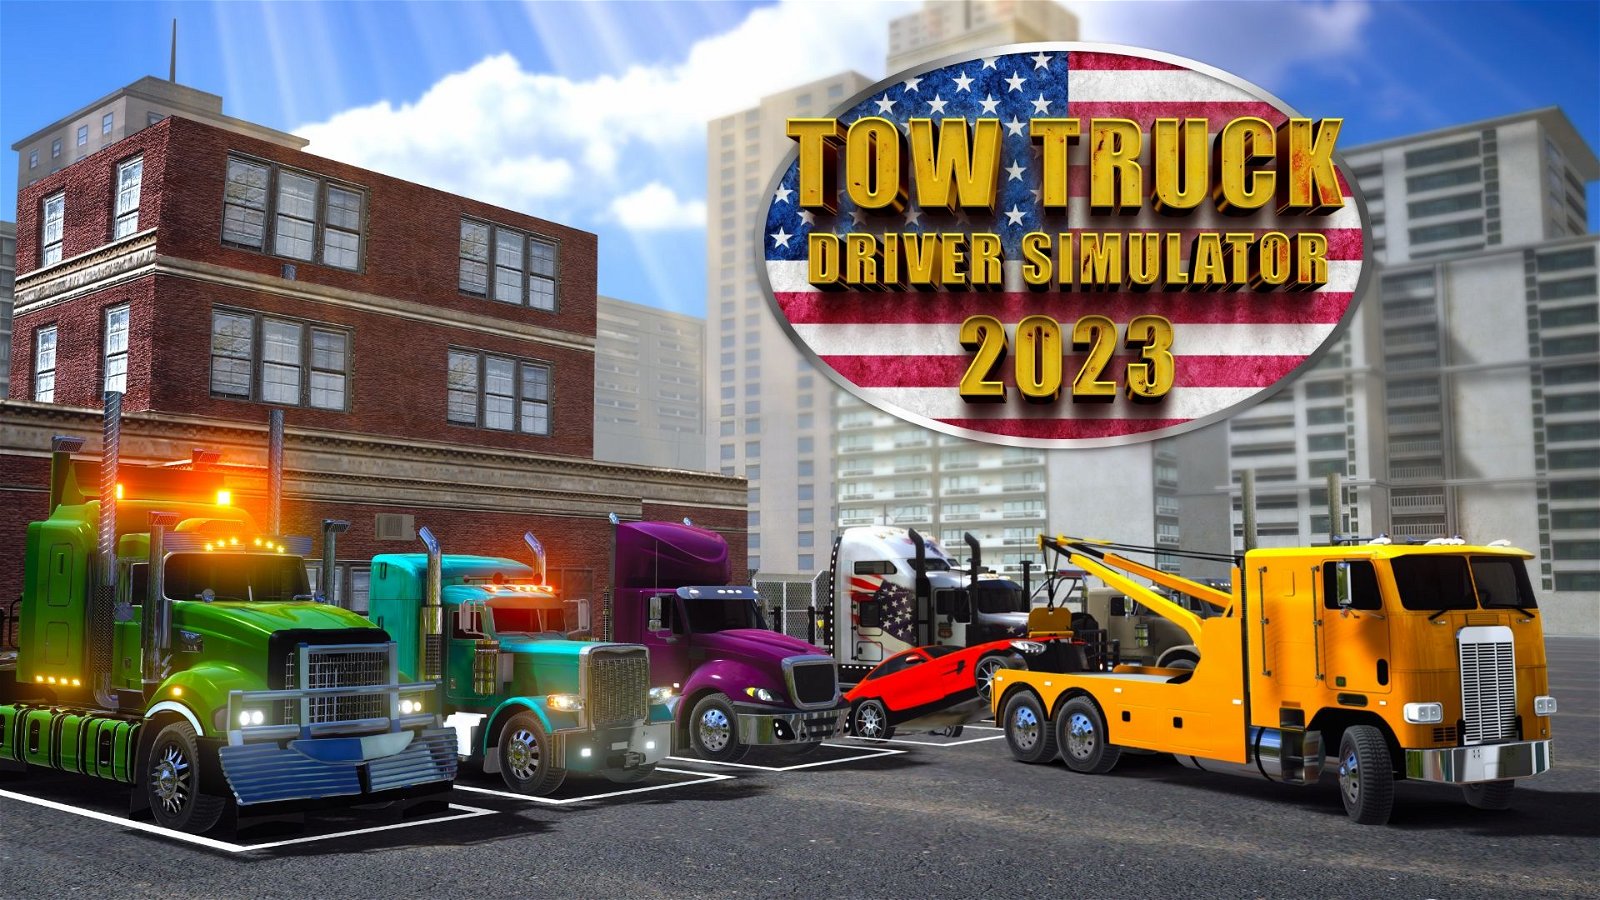 Image of TOW TRUCK Driver Simulator 2023